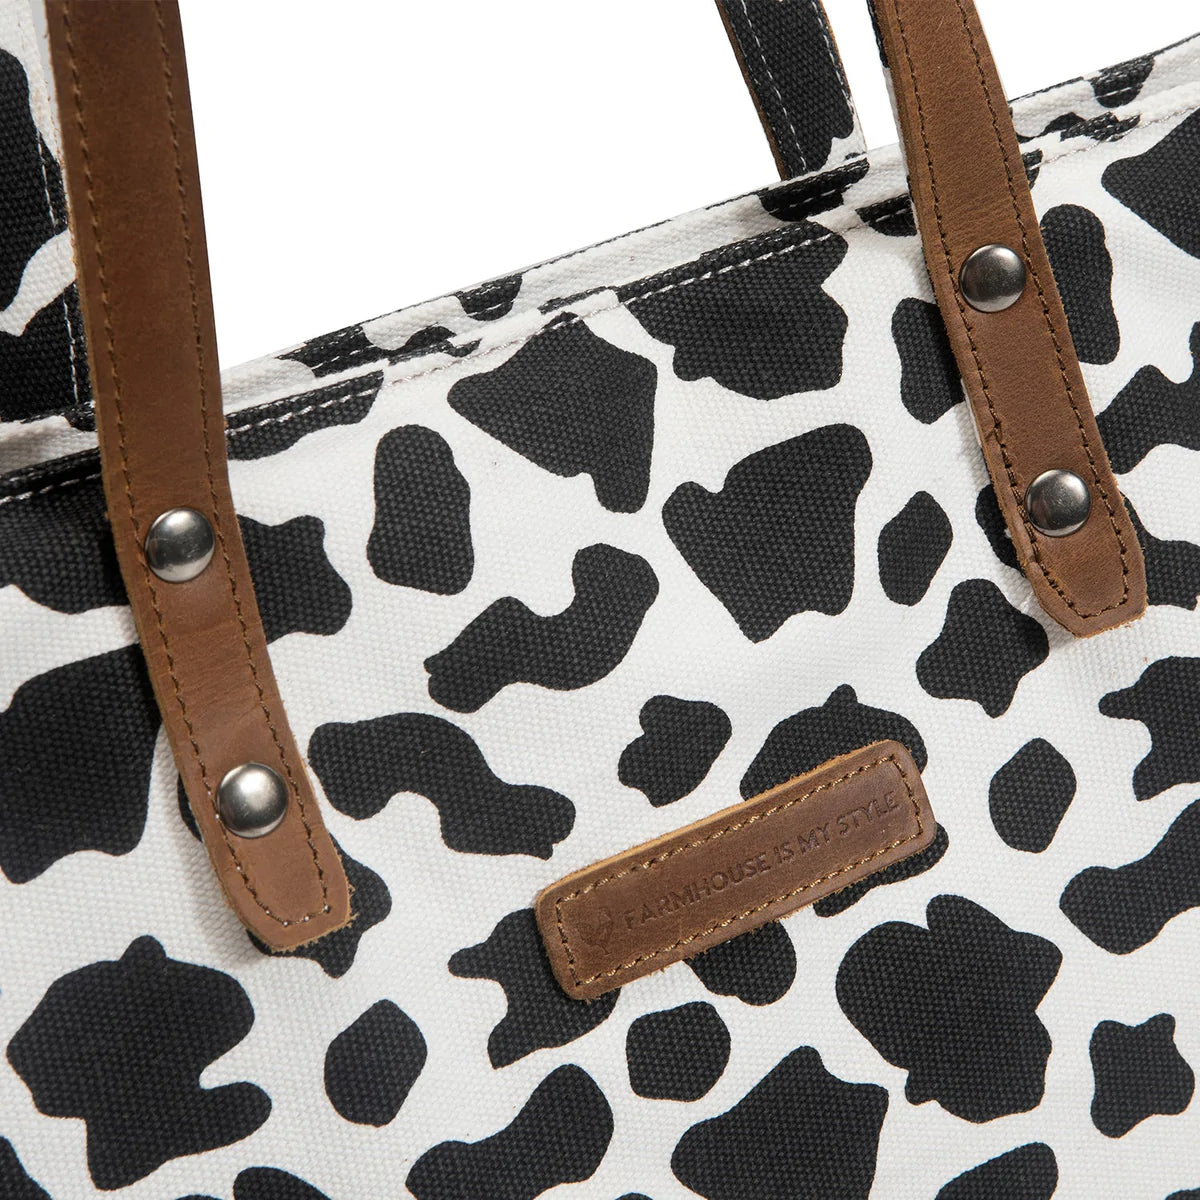 Cowhide Fever Tote Bag and Clutch Bundle